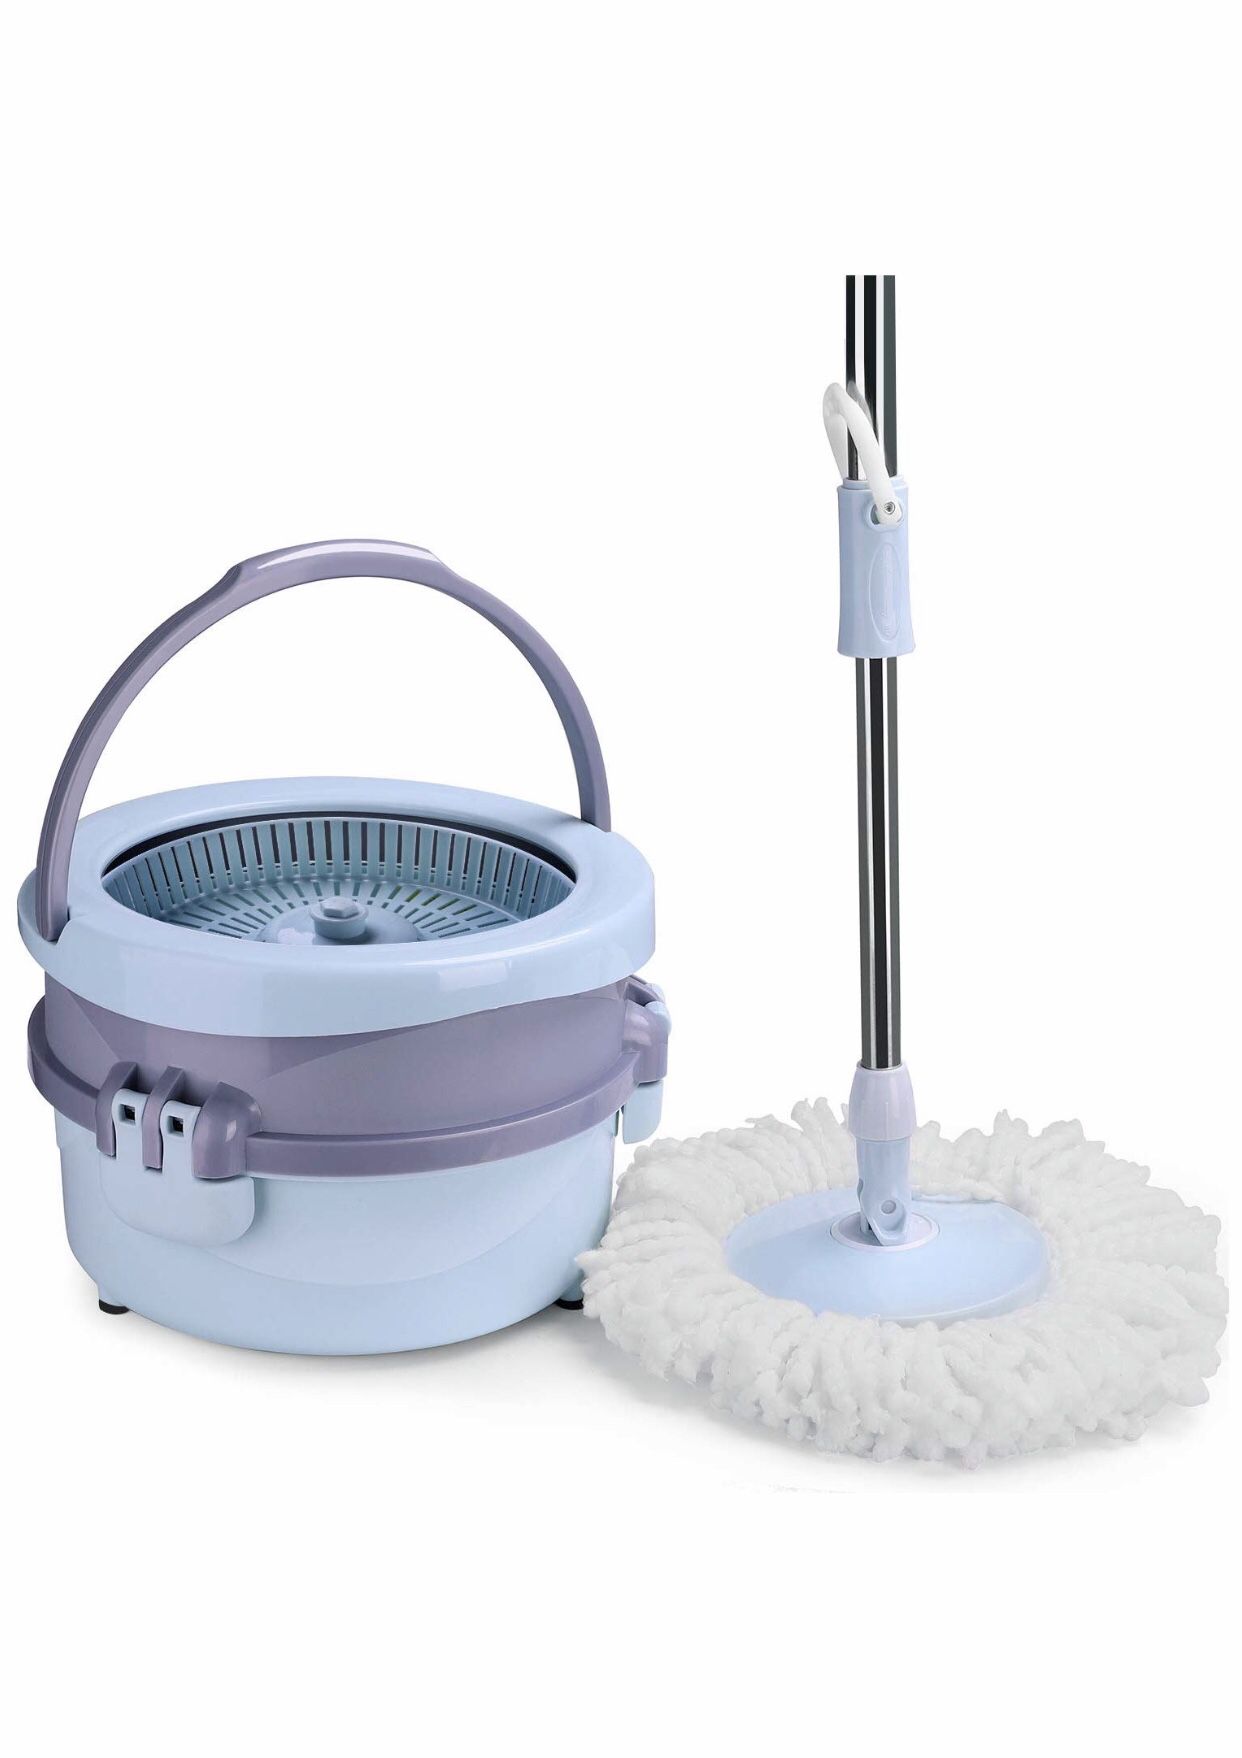 Aicehome Spin Bucket Mop, Splash-proof and Durable Dust Mop with 2 Extra Spin Mop Heads